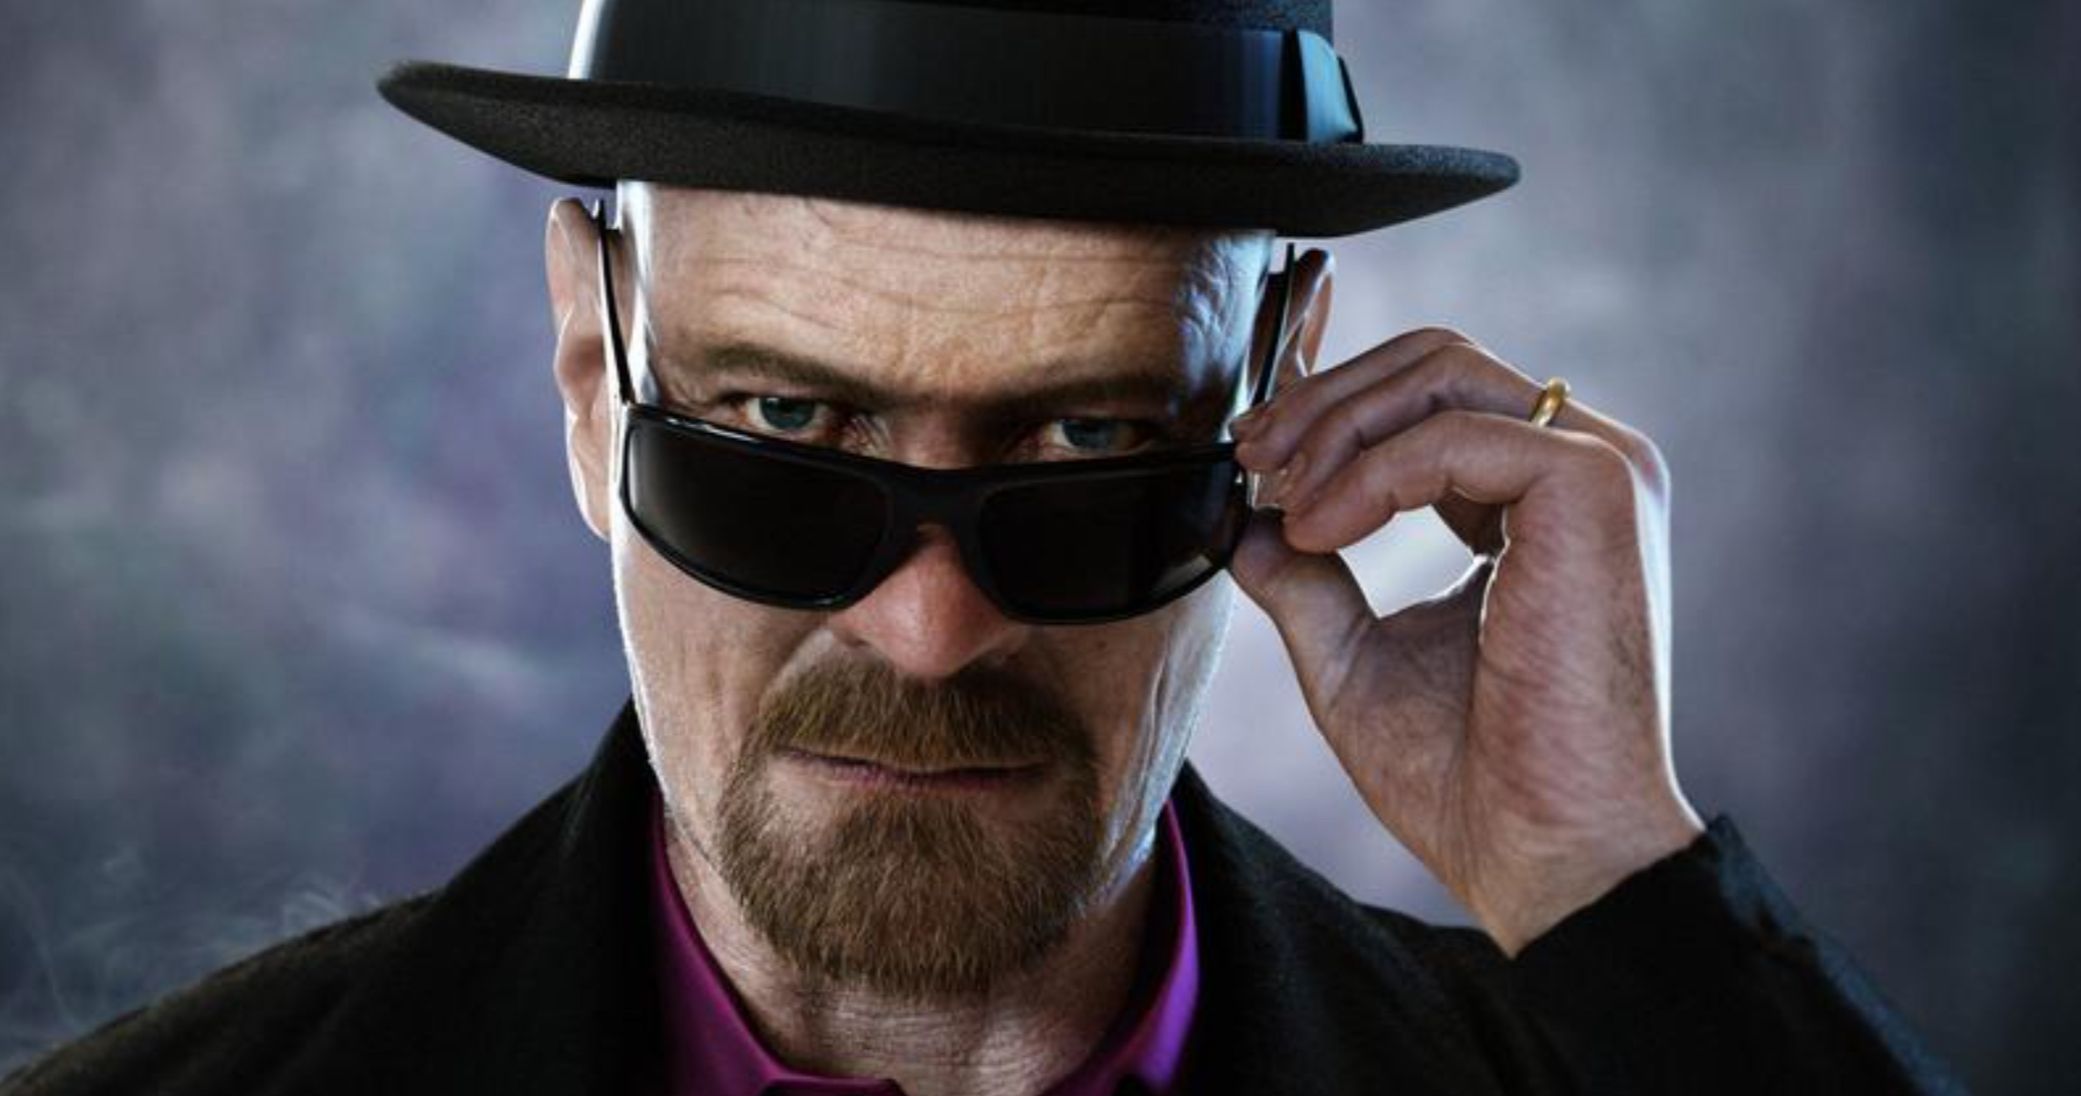 Bryan Cranston Turns 65 and Breaking Bad Fans Are Celebrating His Birthday Worldwide